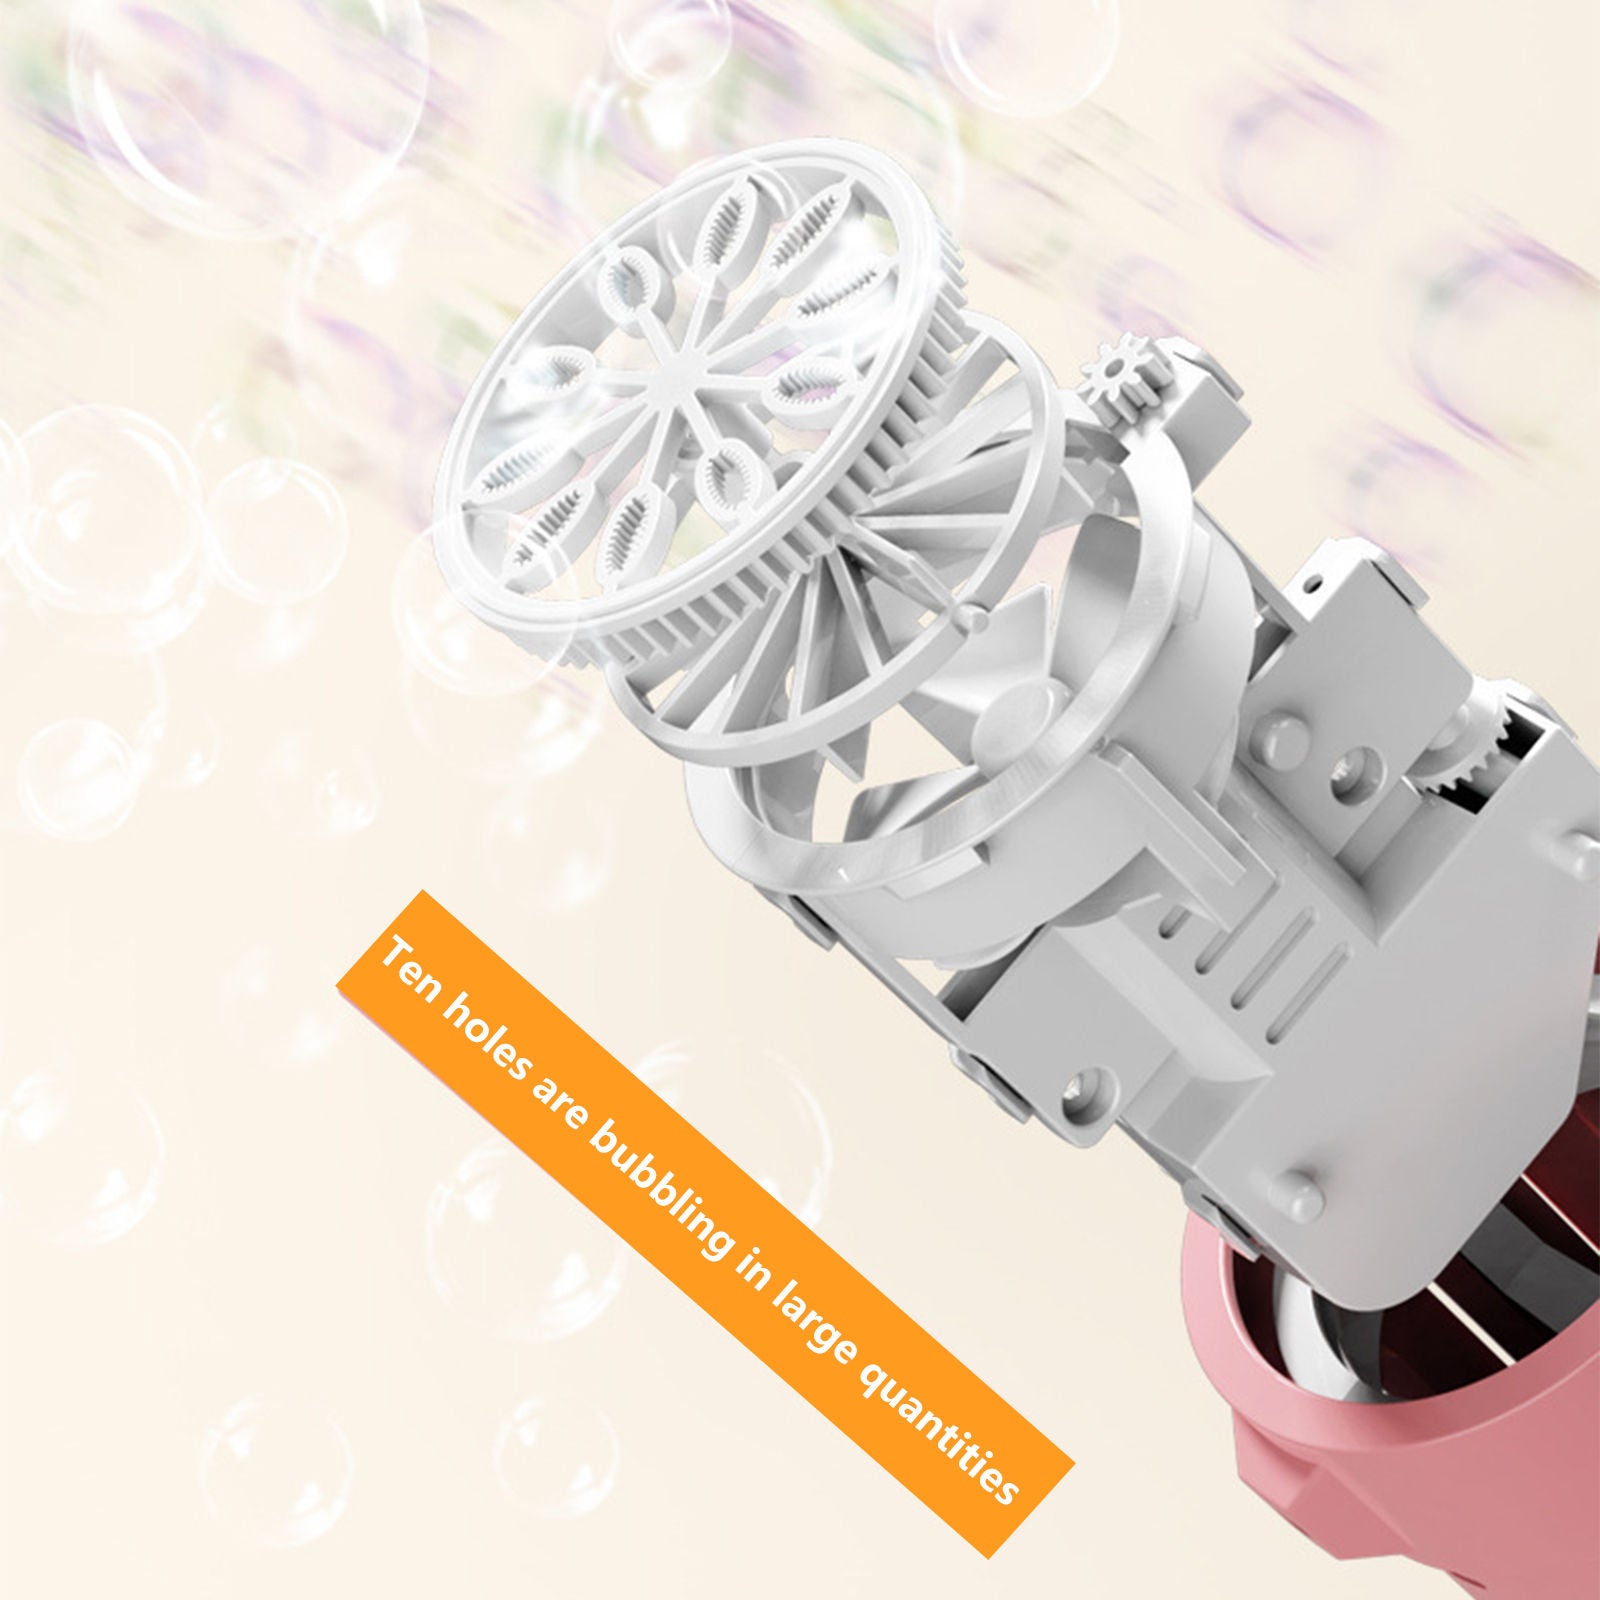 Bubble Machine Fully Automatic Hand-Held Spray Gun Electric 10-Hole Toy Pink